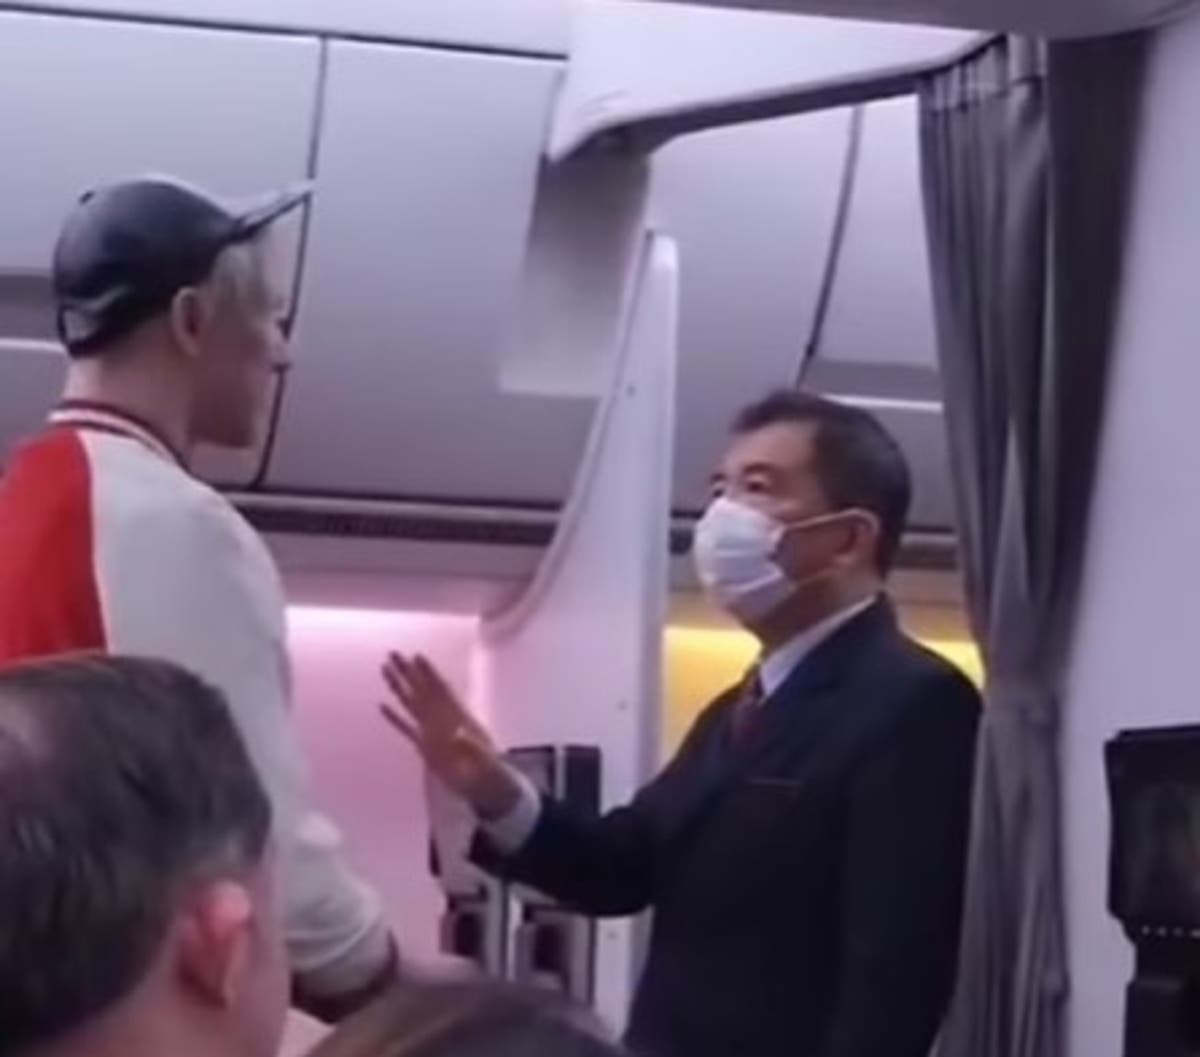 ‘You f***ing idiot’: Man filmed verbally abusing Singapore Airlines crew on flight